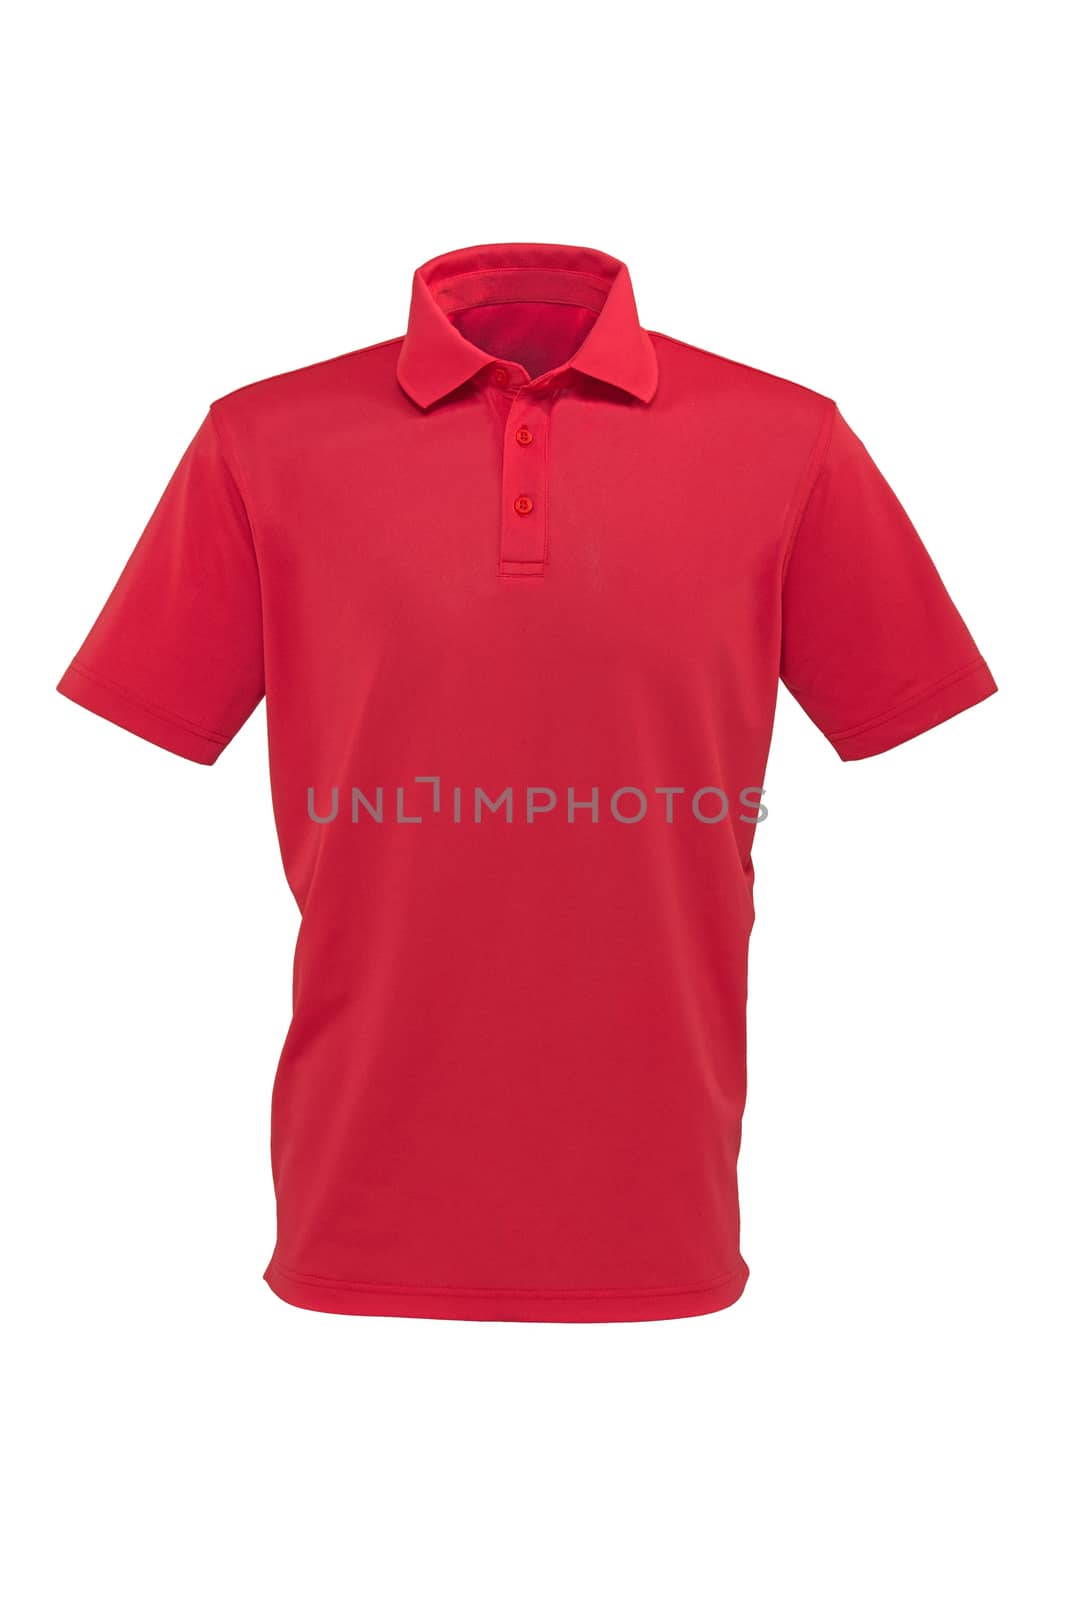 Golf red tee shirt for man or woman by praethip